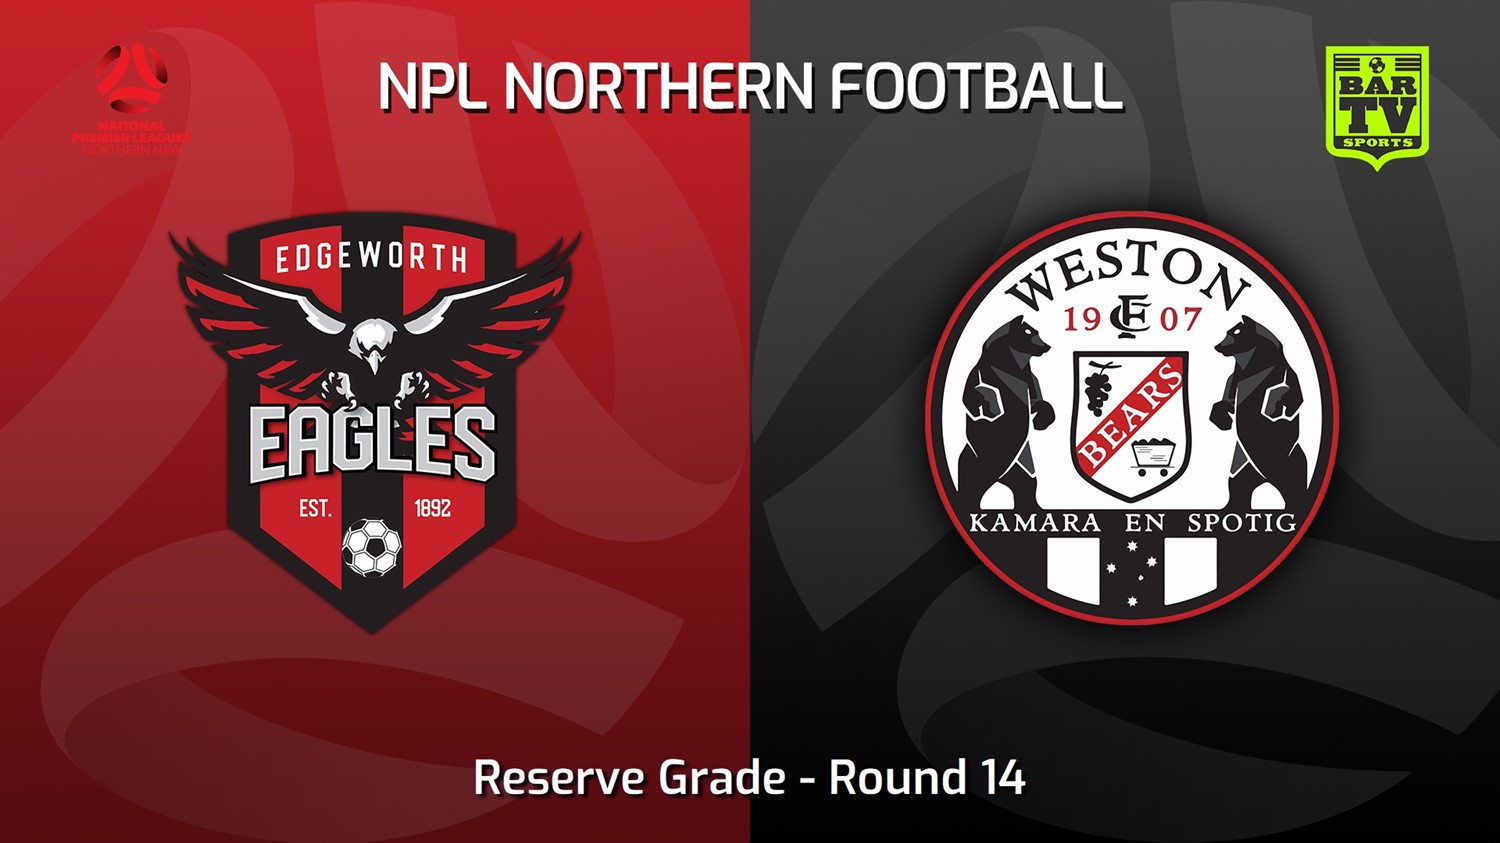 230604-NNSW NPLM Res Round 14 - Edgeworth Eagles Res v Weston Workers FC Res Minigame Slate Image